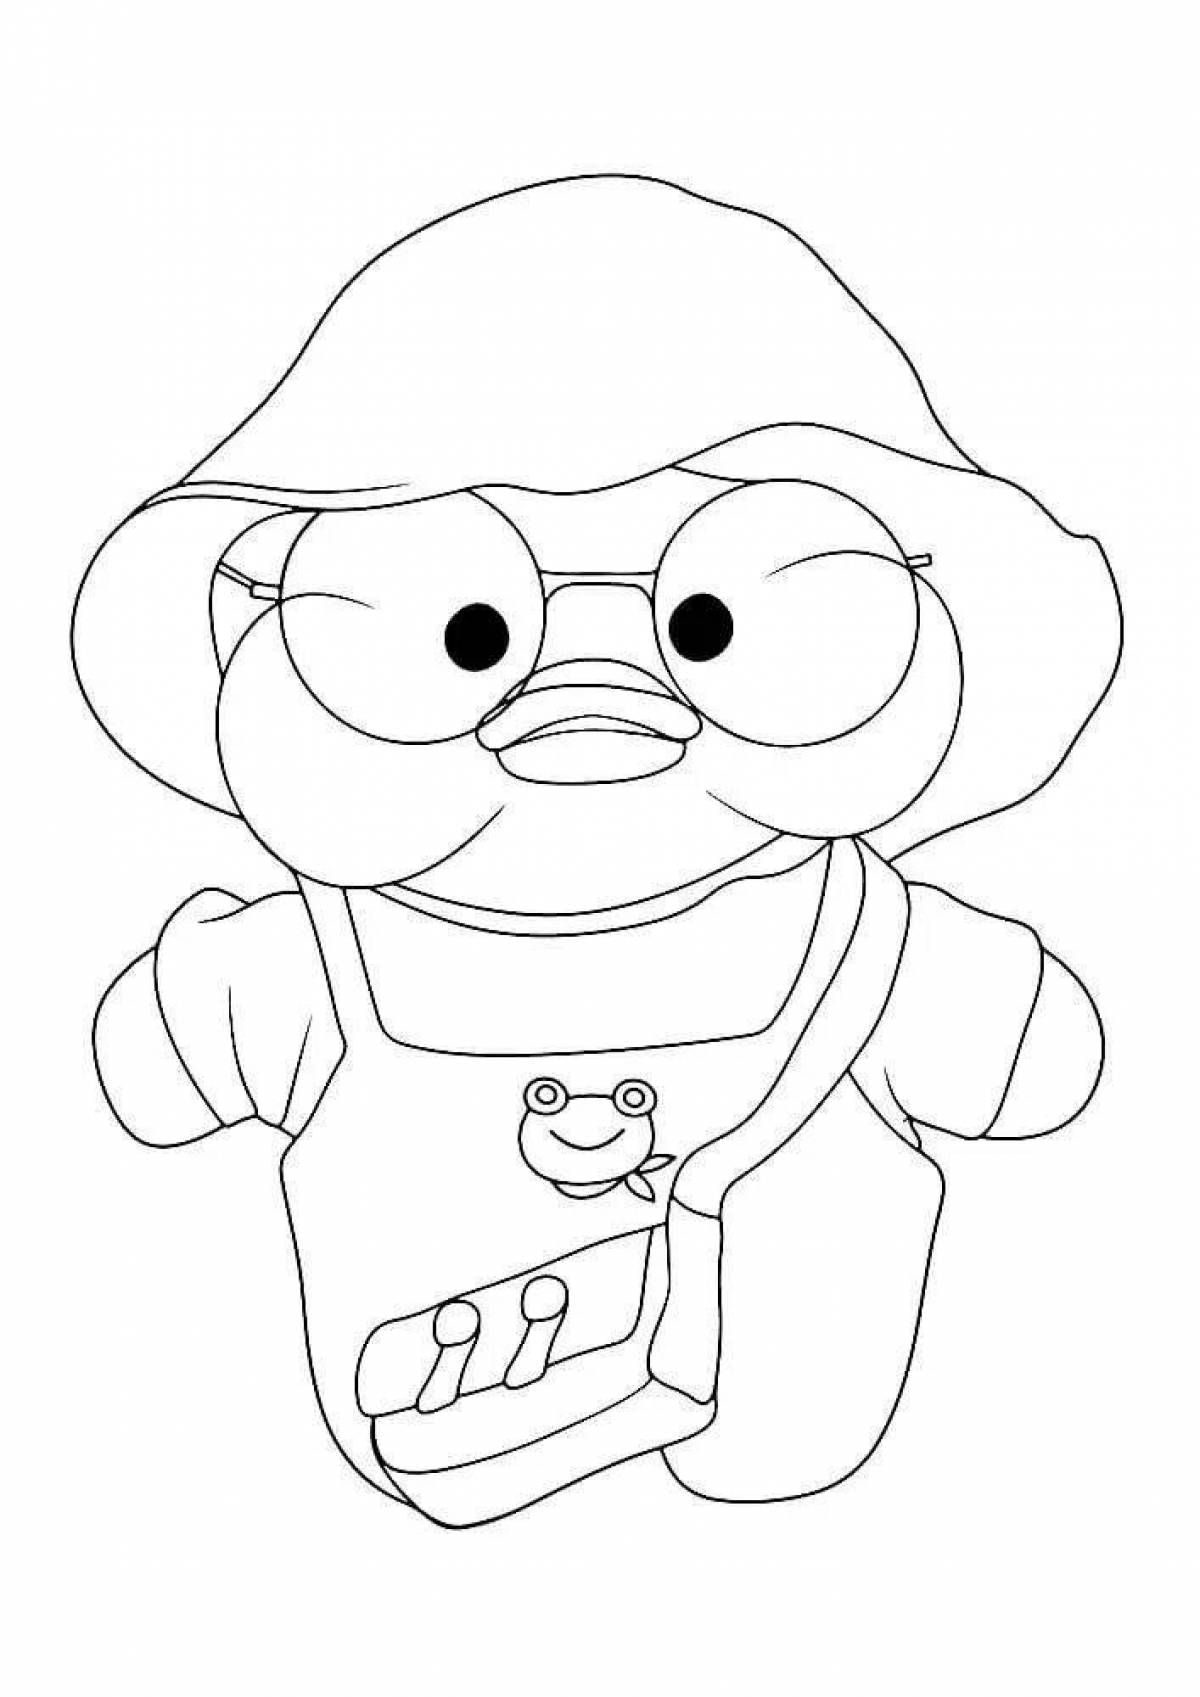 Lalafanfan playful mini duck coloring page